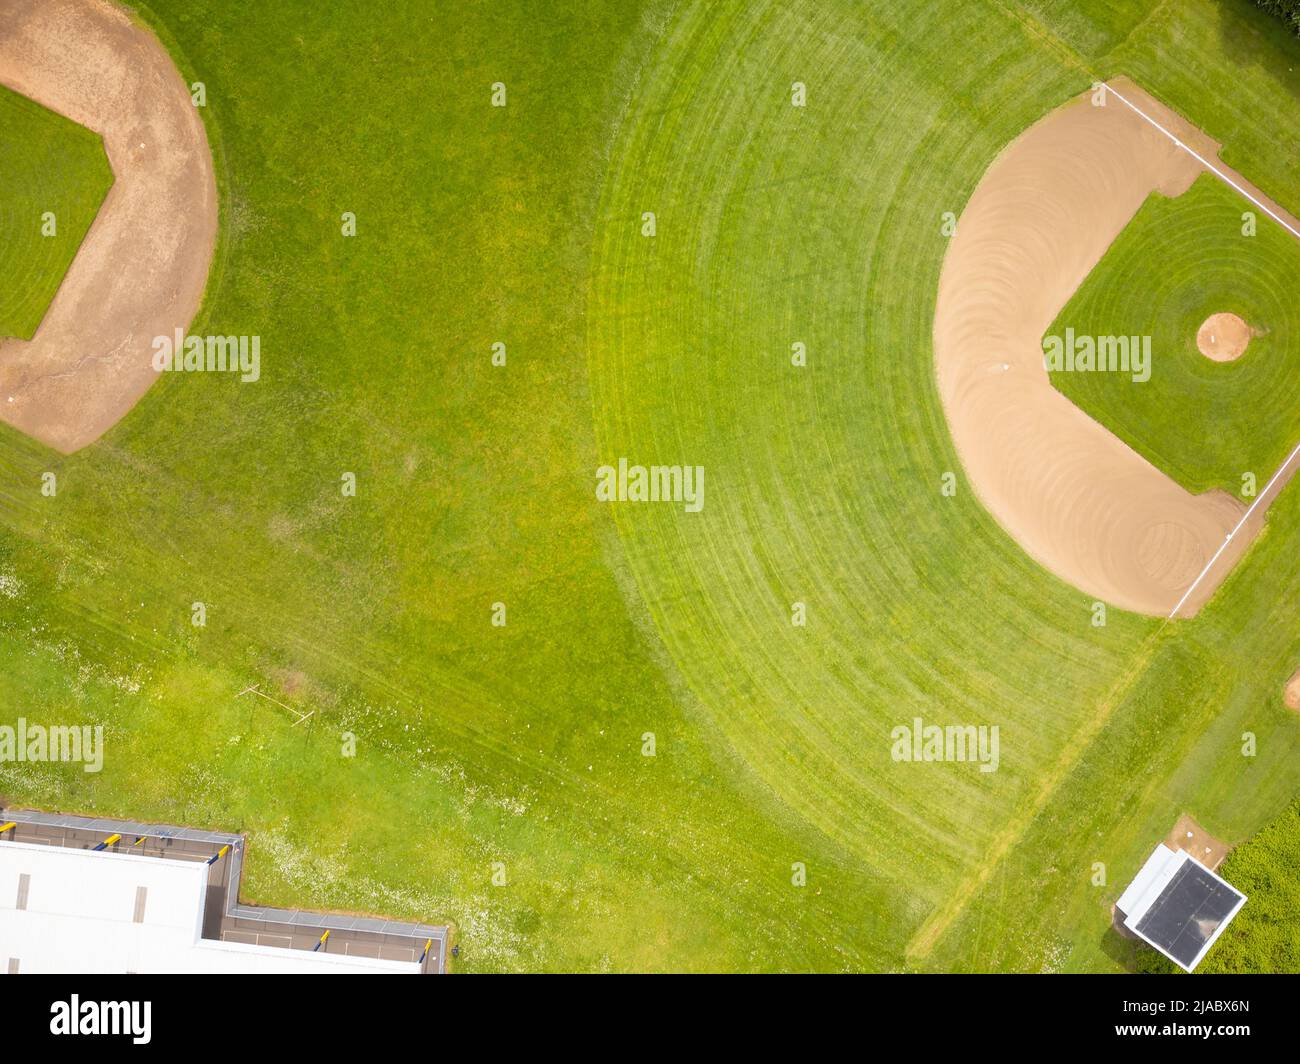 View from above. Green sports ground with markings. Sports games, training, championships, matches. Professional and amateur sports, healthy lifestyle Stock Photo